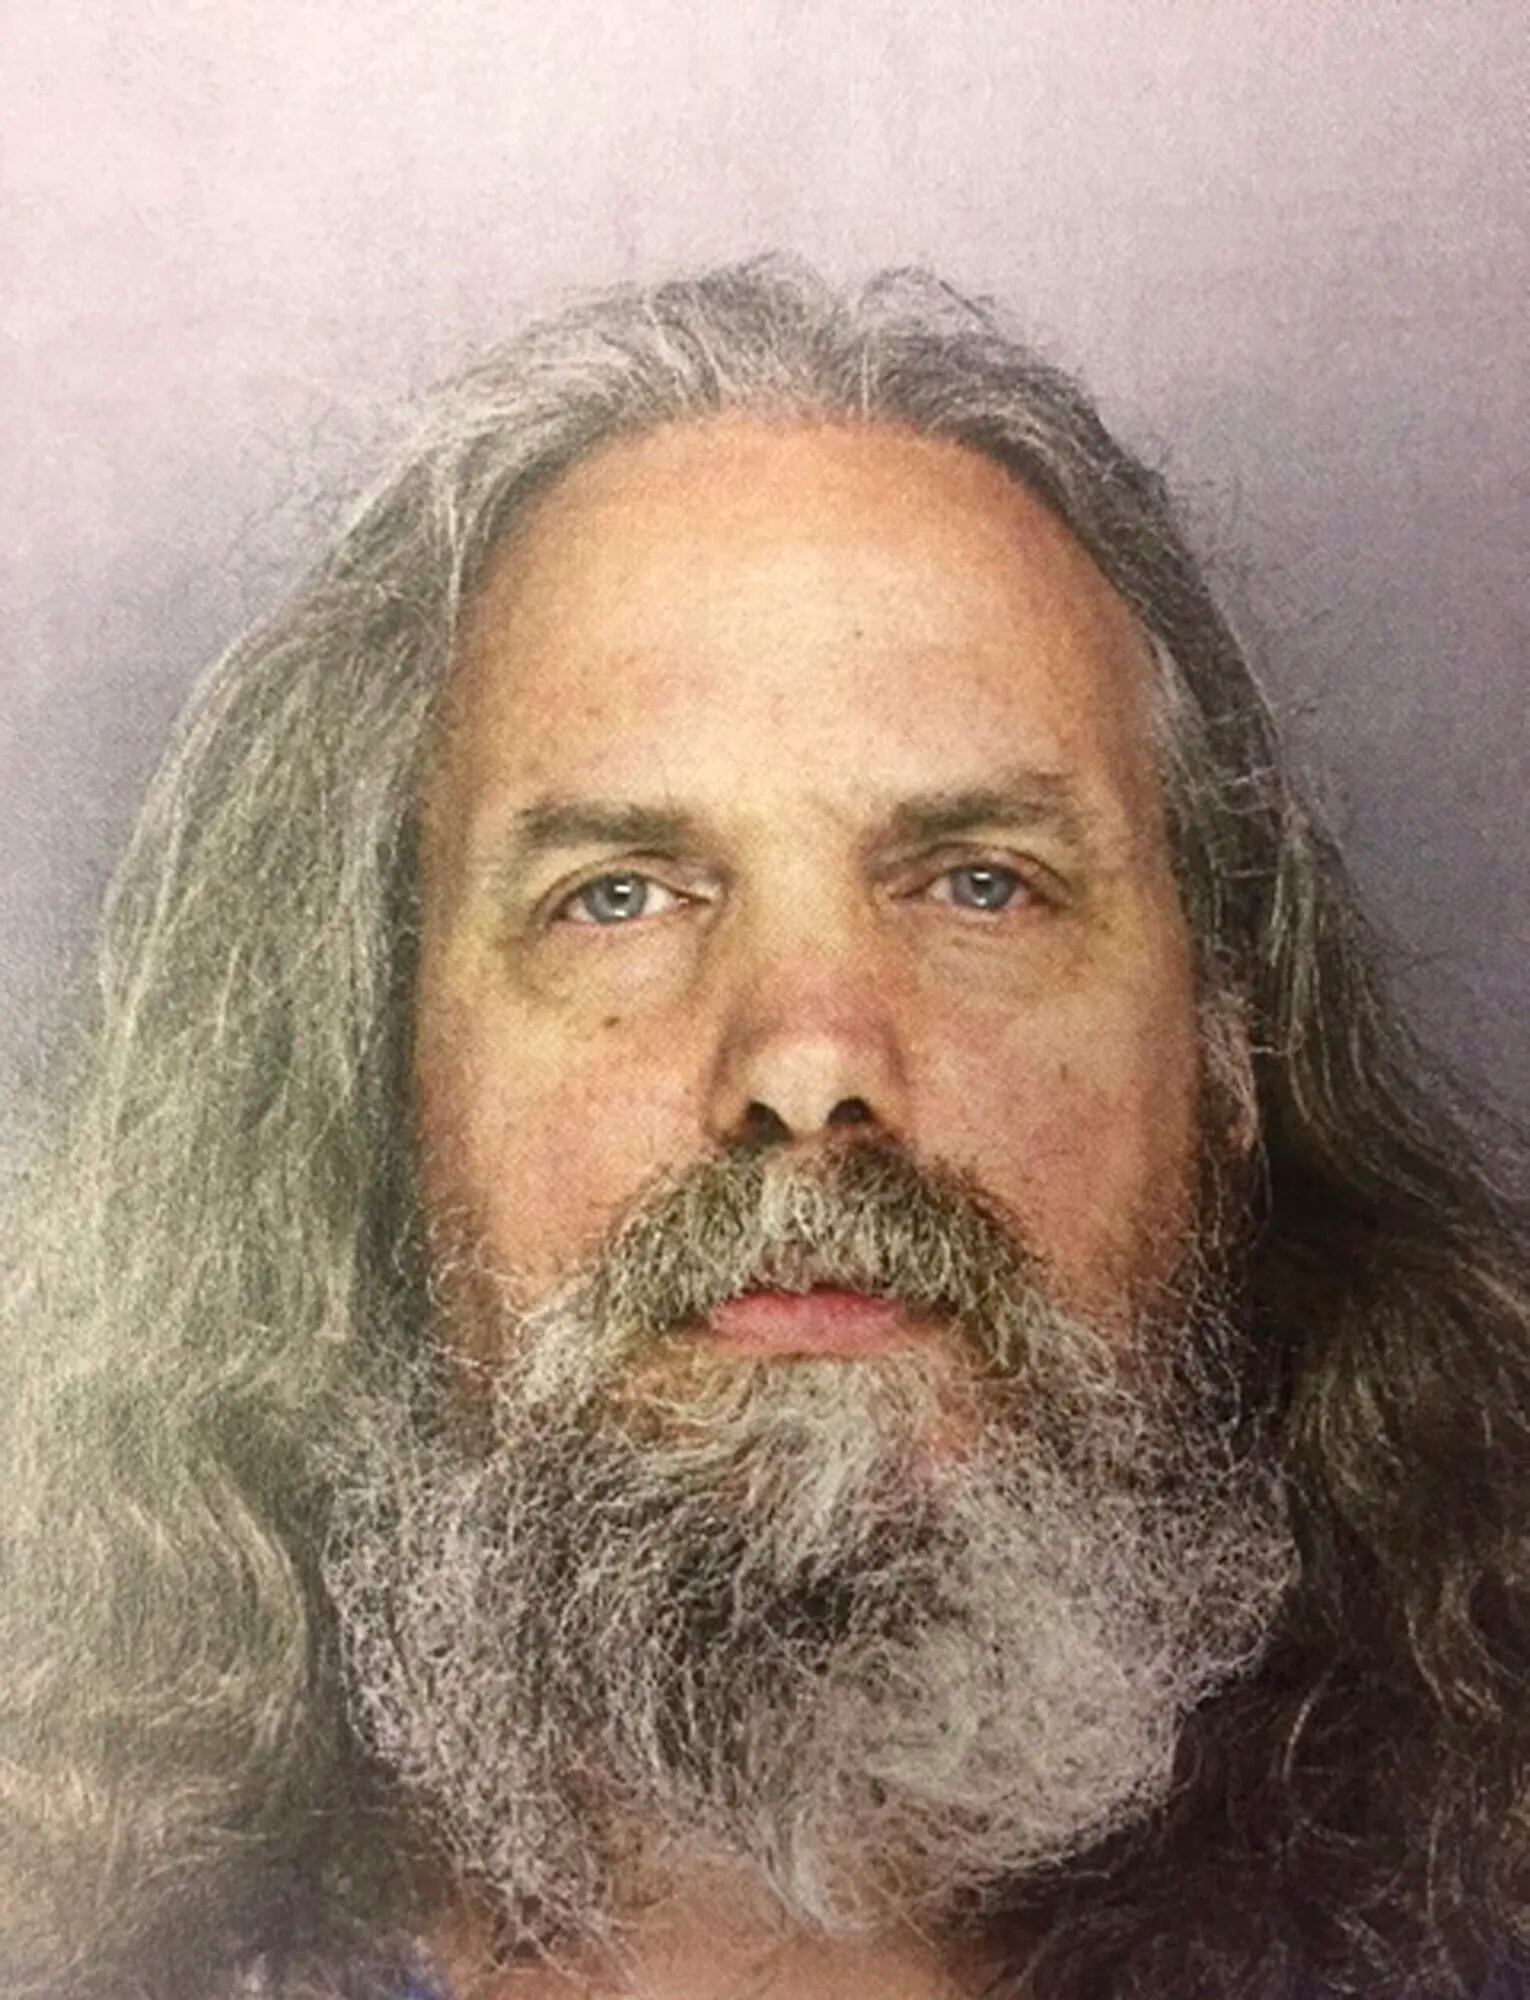 At 'gifted' trial, girl tells of sex with Lee Kaplan at age 7